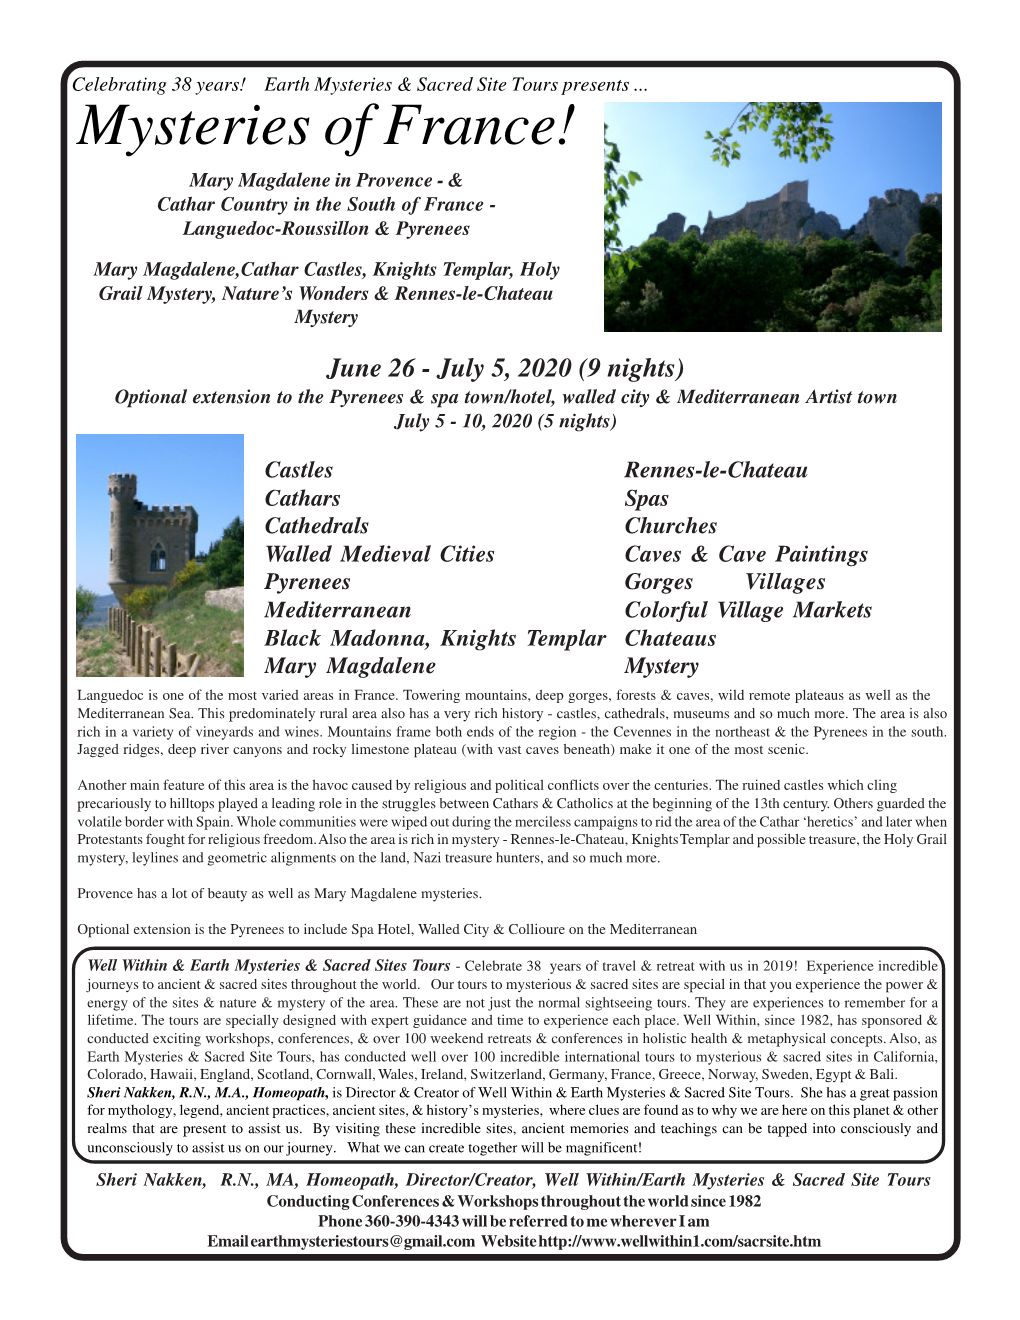 Mysteries of France! Mary Magdalene in Provence - & Cathar Country in the South of France - Languedoc-Roussillon & Pyrenees